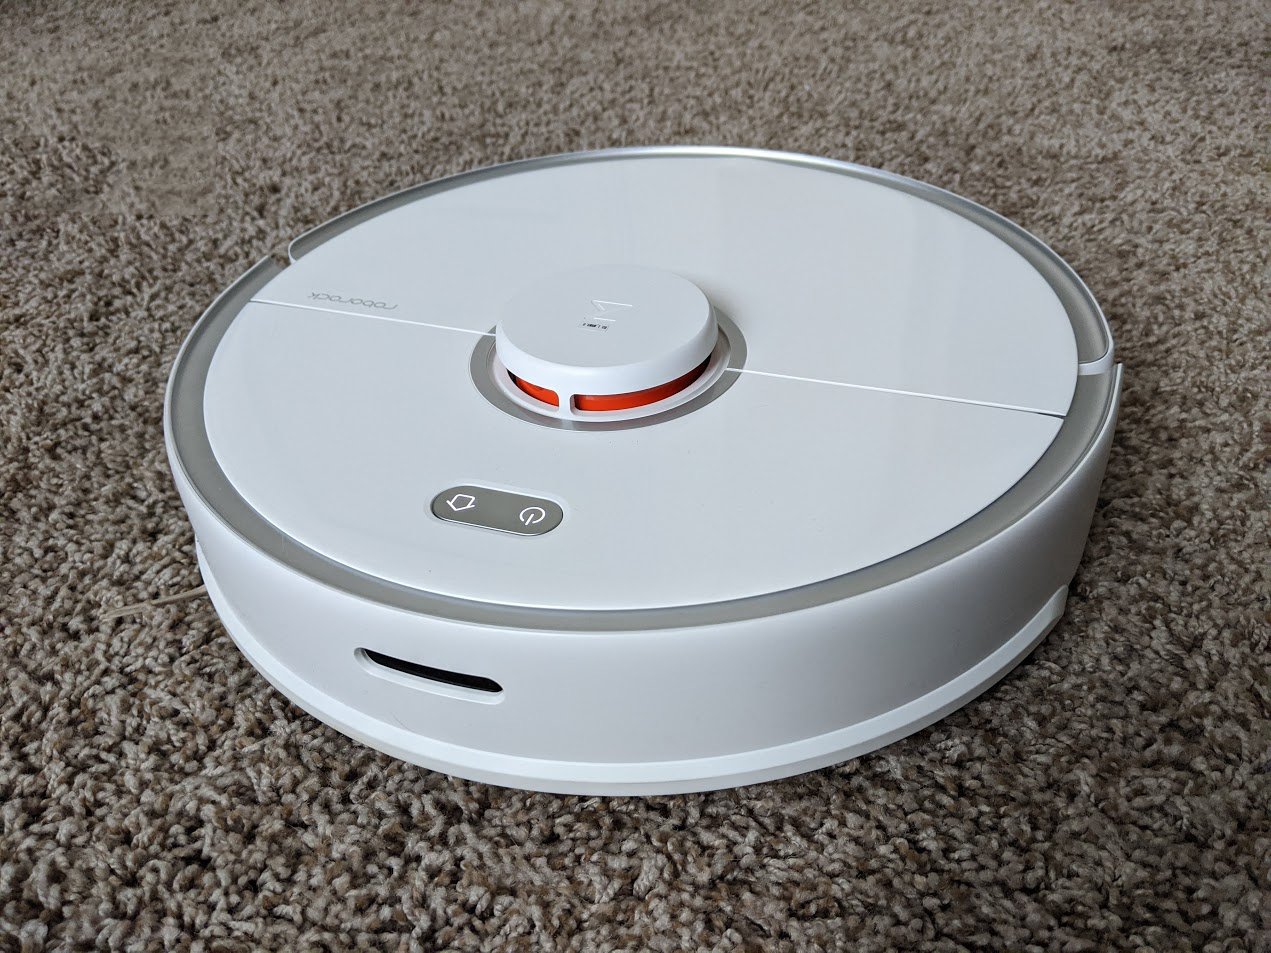 https://www.androidcentral.com/sites/androidcentral.com/files/styles/large_wm_brw/public/article_images/2019/12/roborock-s5-max-robot-vacuum-001.jpg?itok=dGY0WxvO